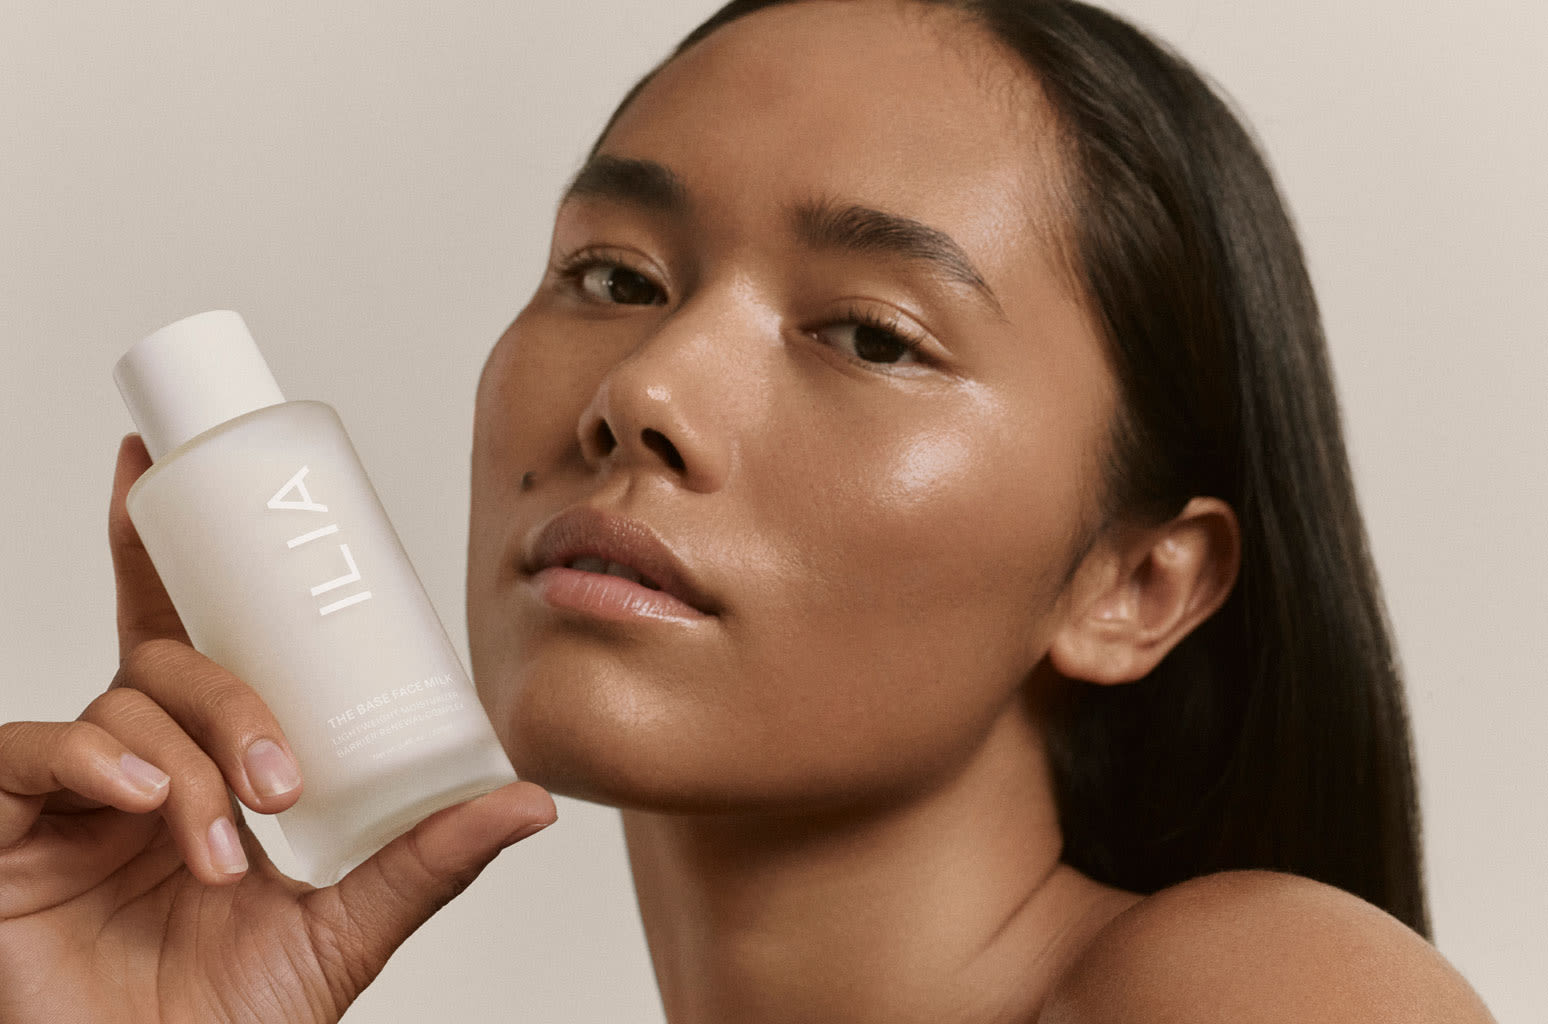 Celeb-Loved Beauty Brand Ilia Offering Up to 40% Off Sitewide — Including the Viral Complexion Stick